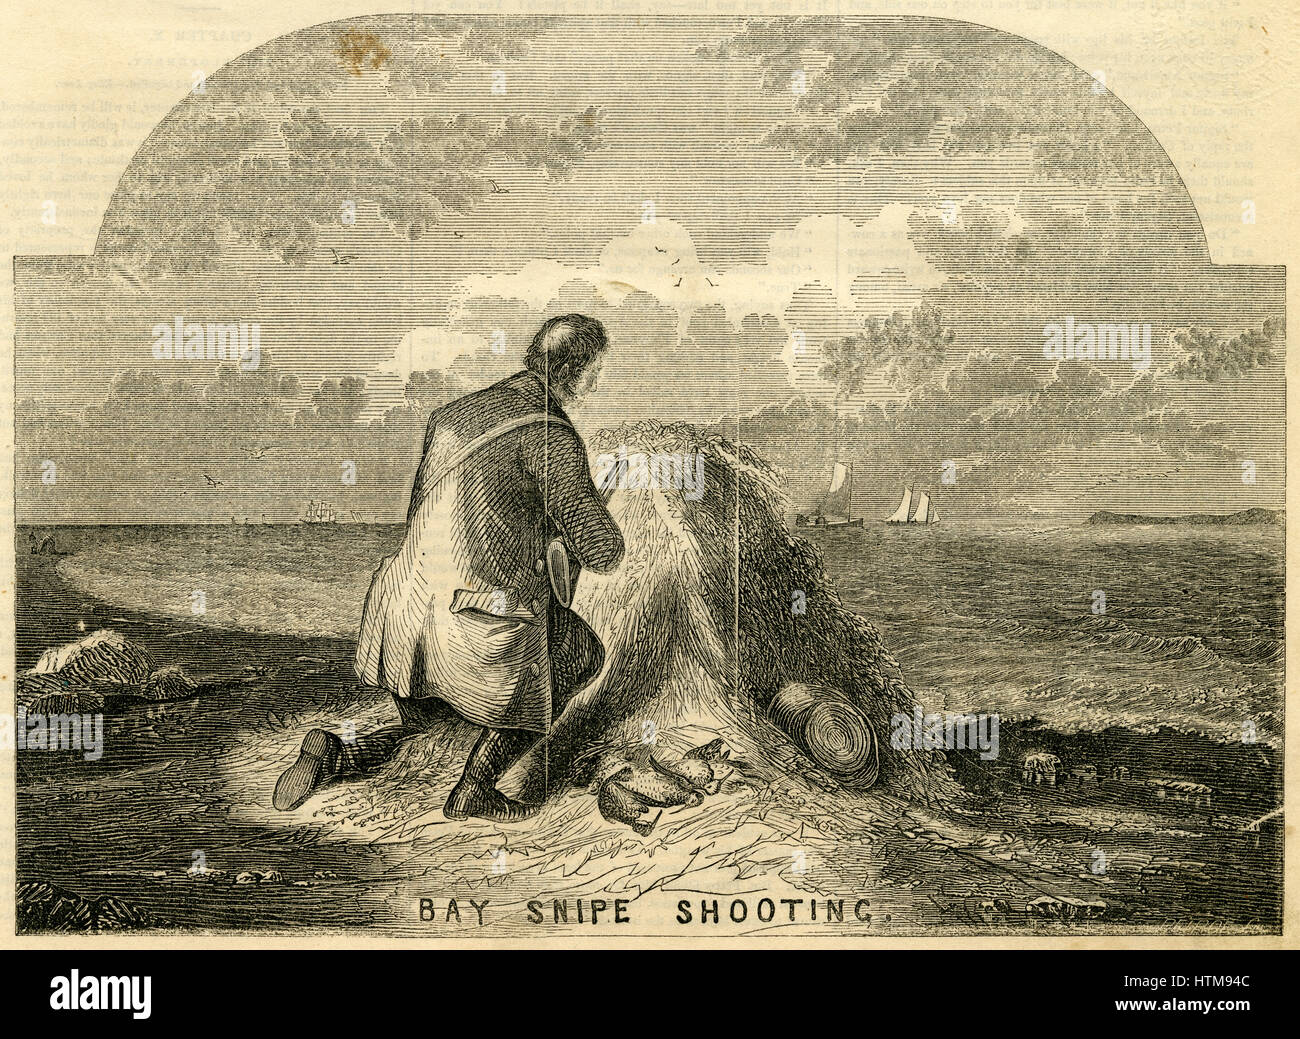 Antique 1854 engraving, 'Bay Snipe Shooting. At the close of April, the red-breasted snipe arrives on the coasts of Long Island.' The long-billed dowitcher (Limnodromus scolopaceus) is a medium-sized shorebird. SOURCE: ORIGINAL ENGRAVING. Stock Photo